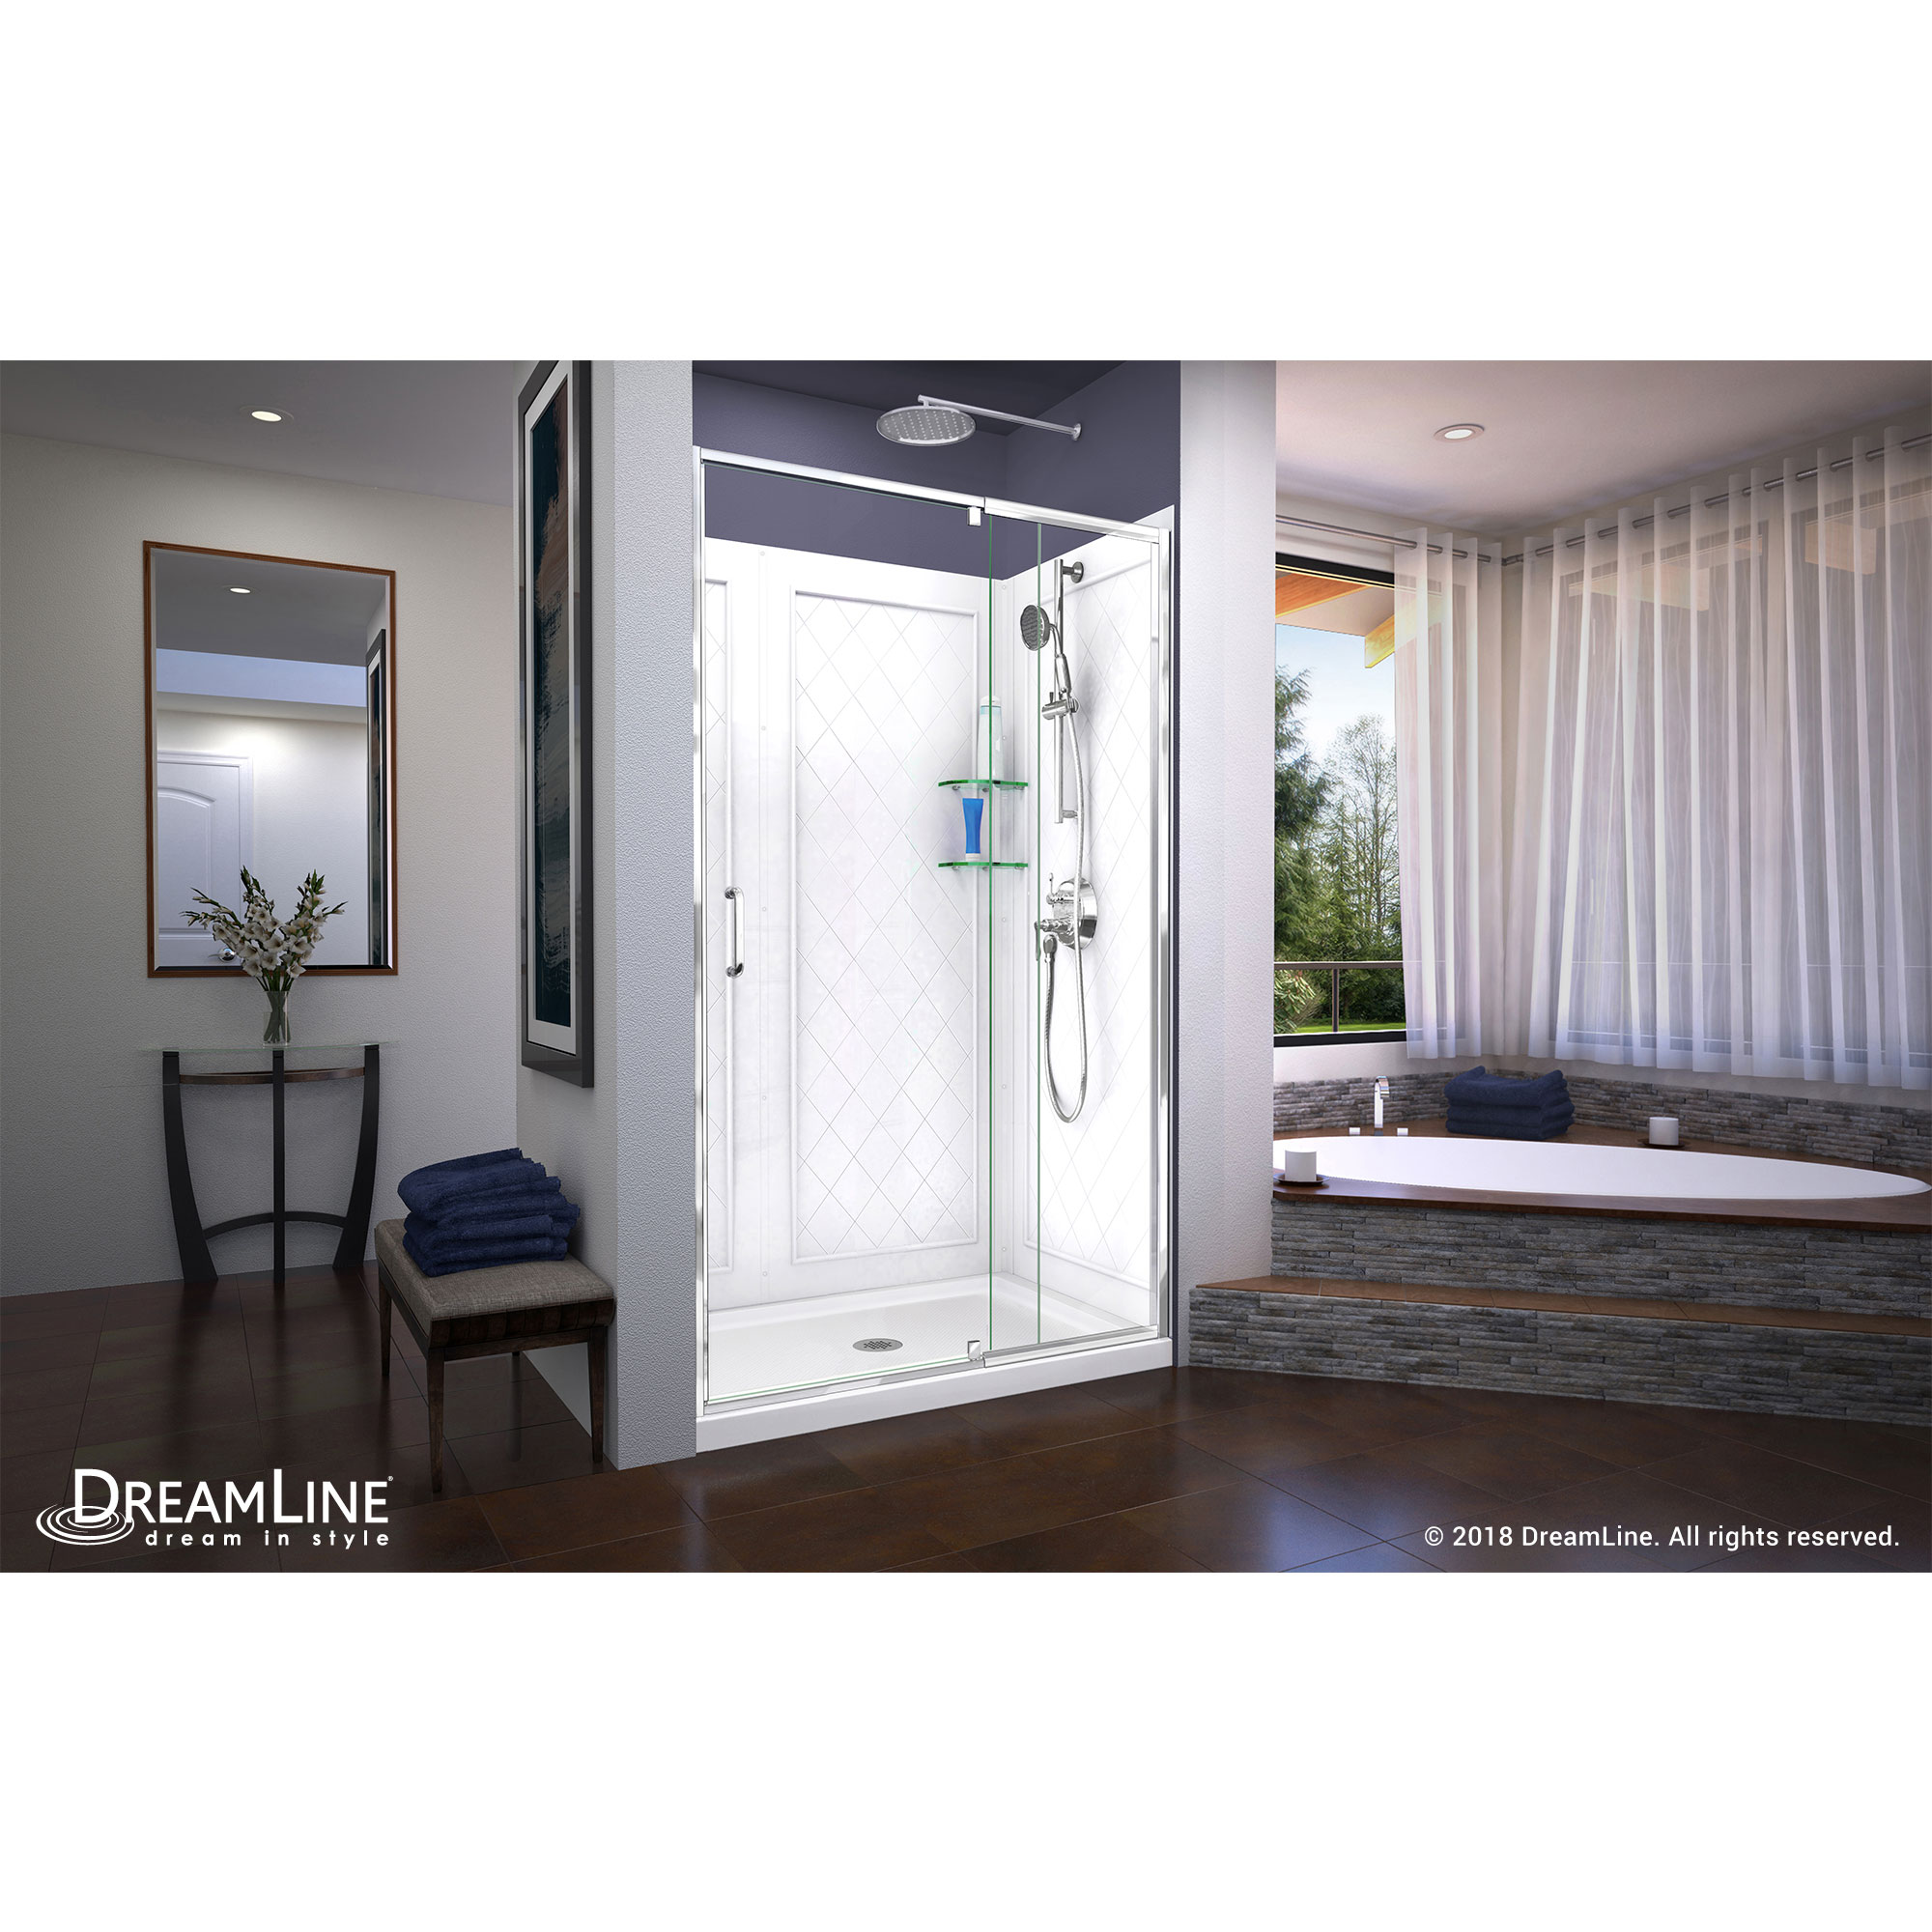 DreamLine Flex 36 in. D x 48 in. W x 76 3/4 in. H Pivot Shower Door in Chrome with Center Drain White Base and Backwall Kit